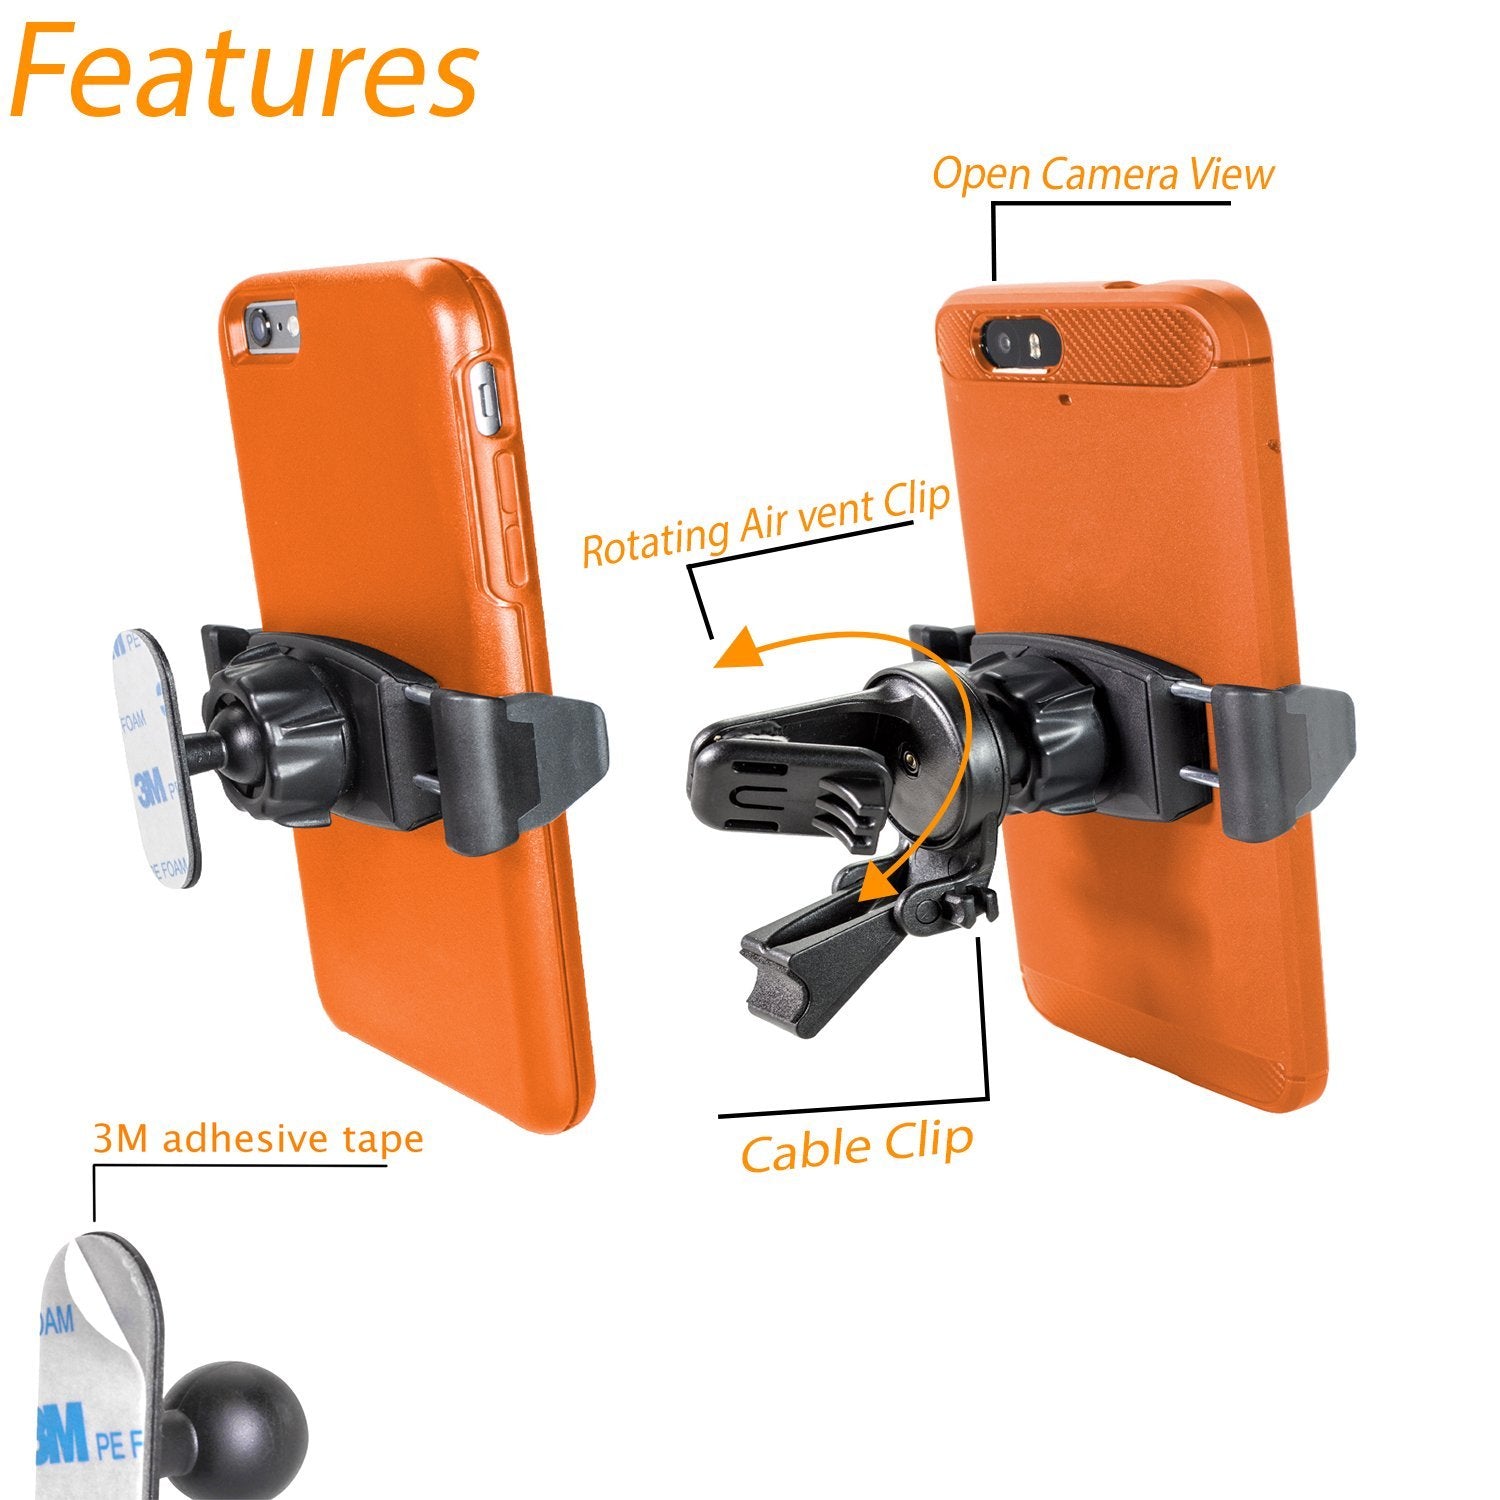 miniProXL™ Vent Kit for all Smartphones